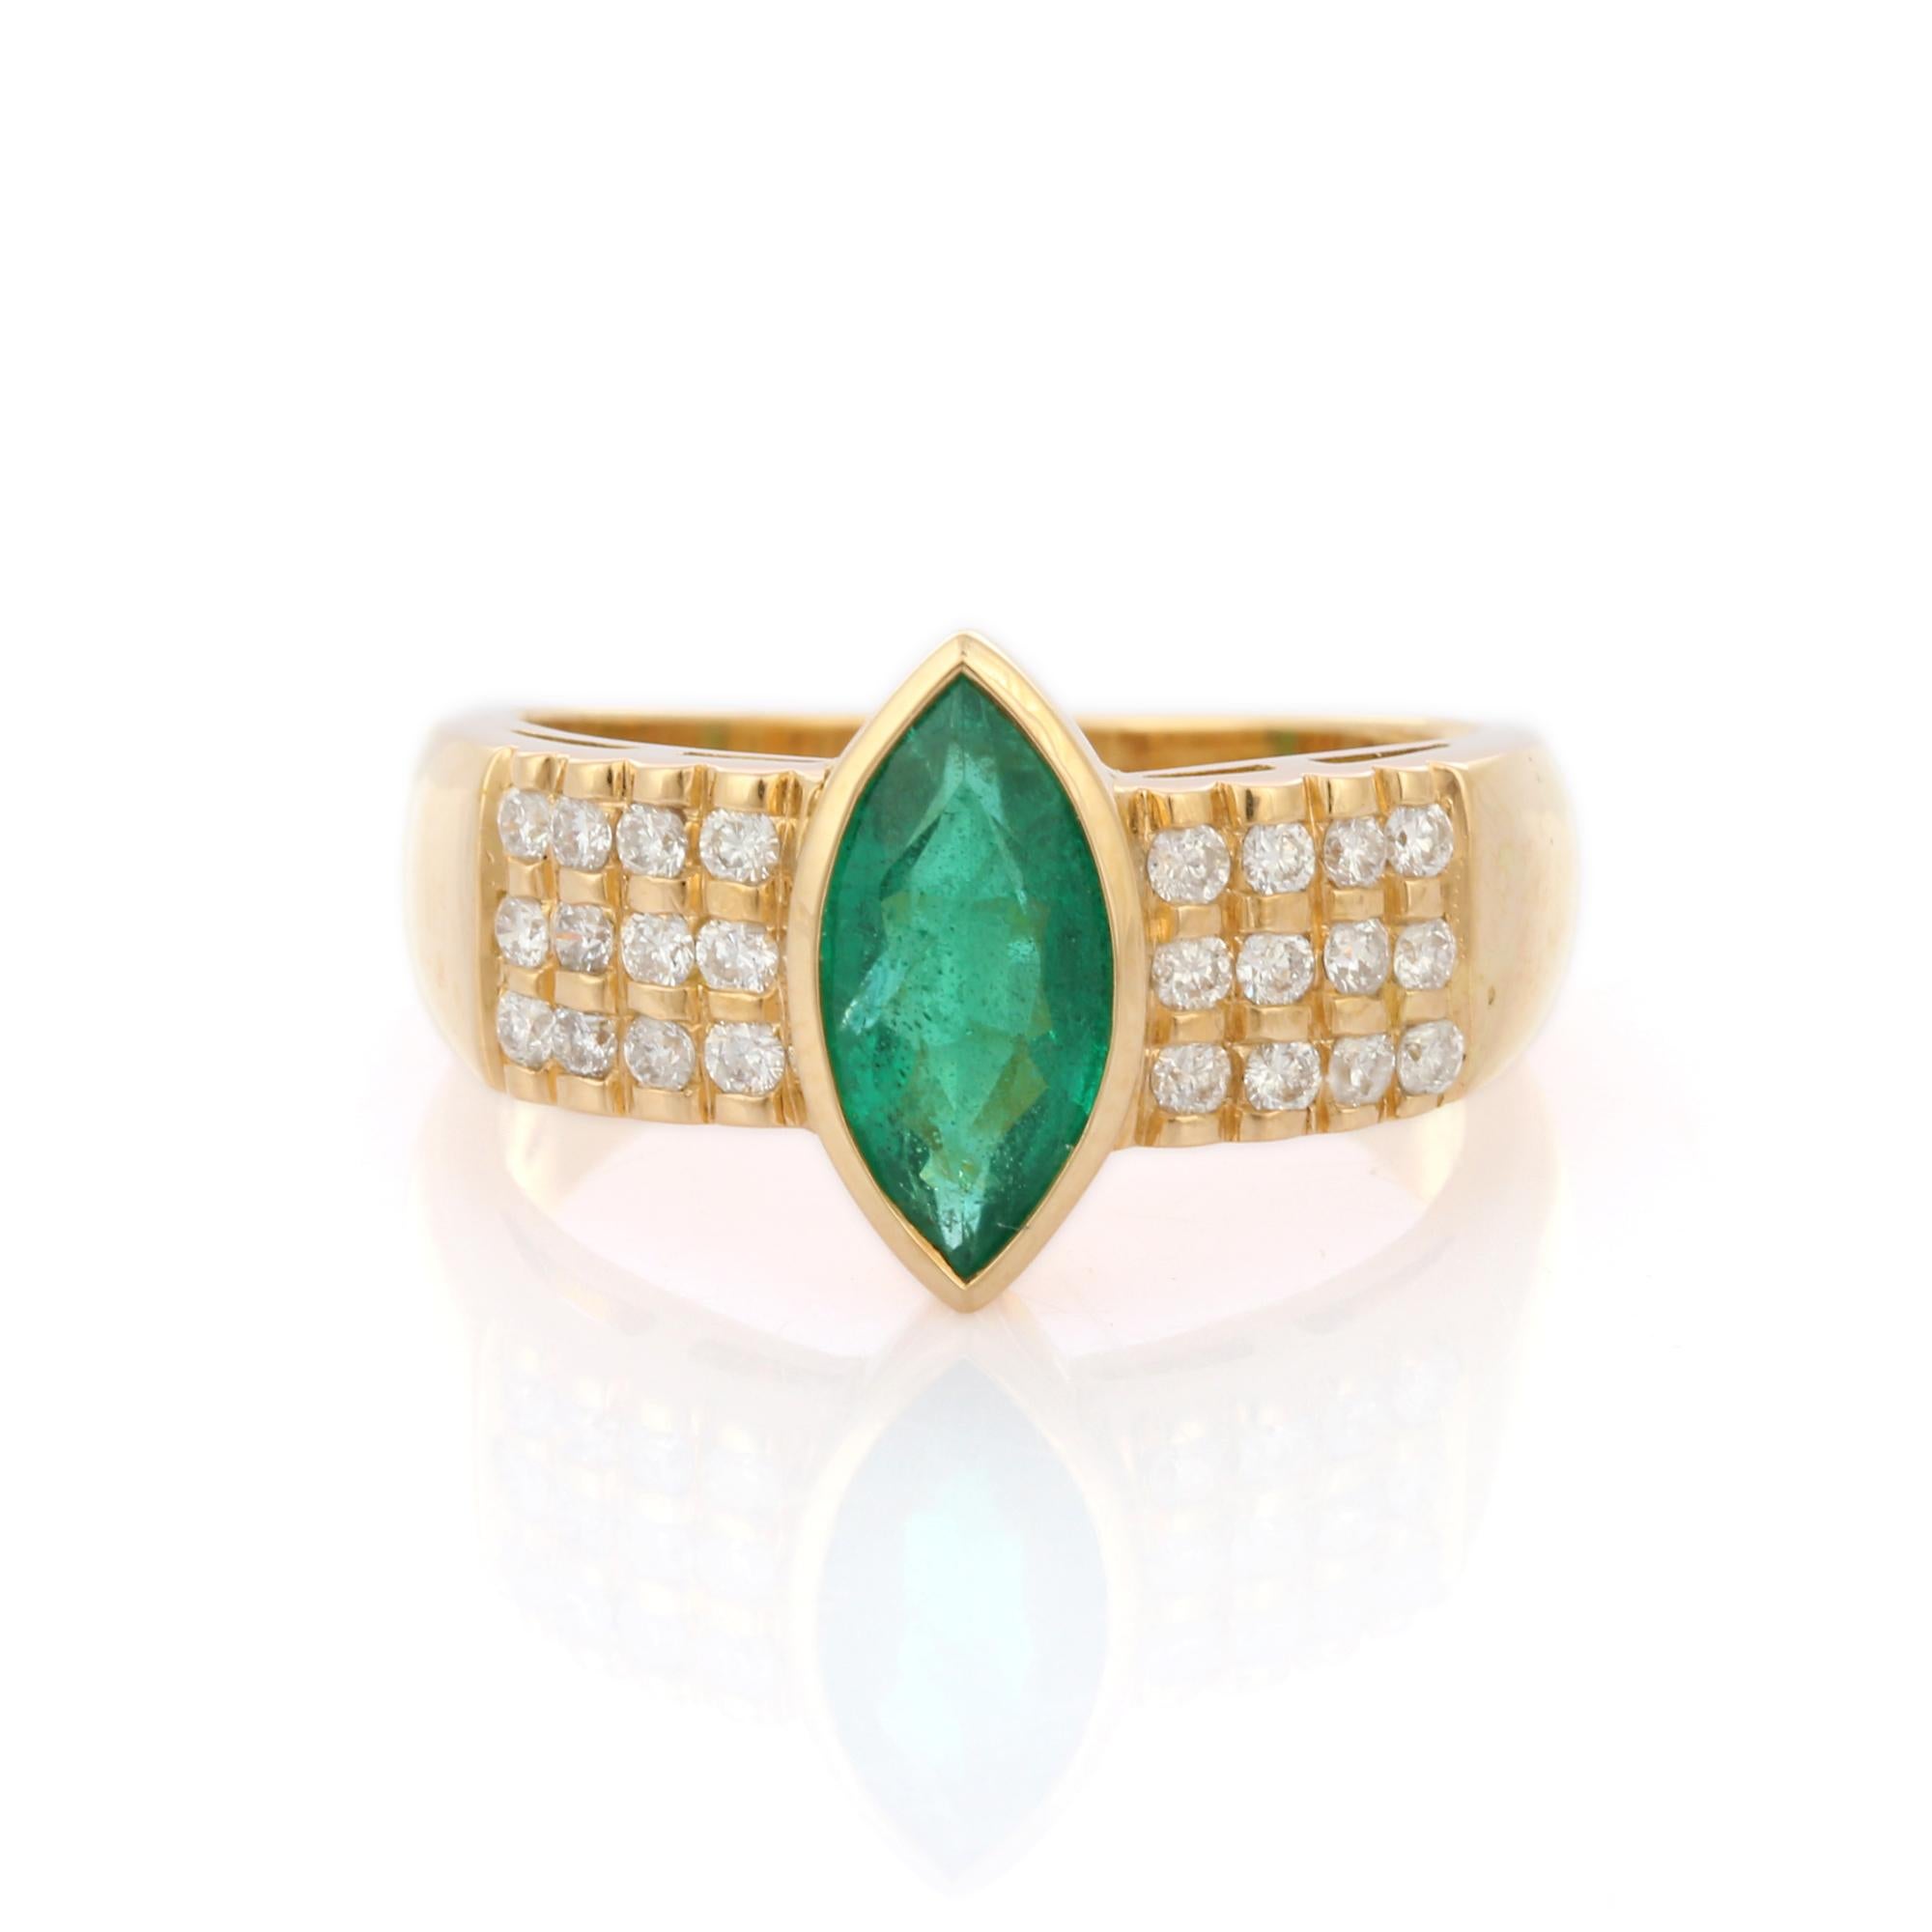 For Sale:  18K Yellow Gold Marquise Cut Emerald and Diamond Cocktail Ring 5